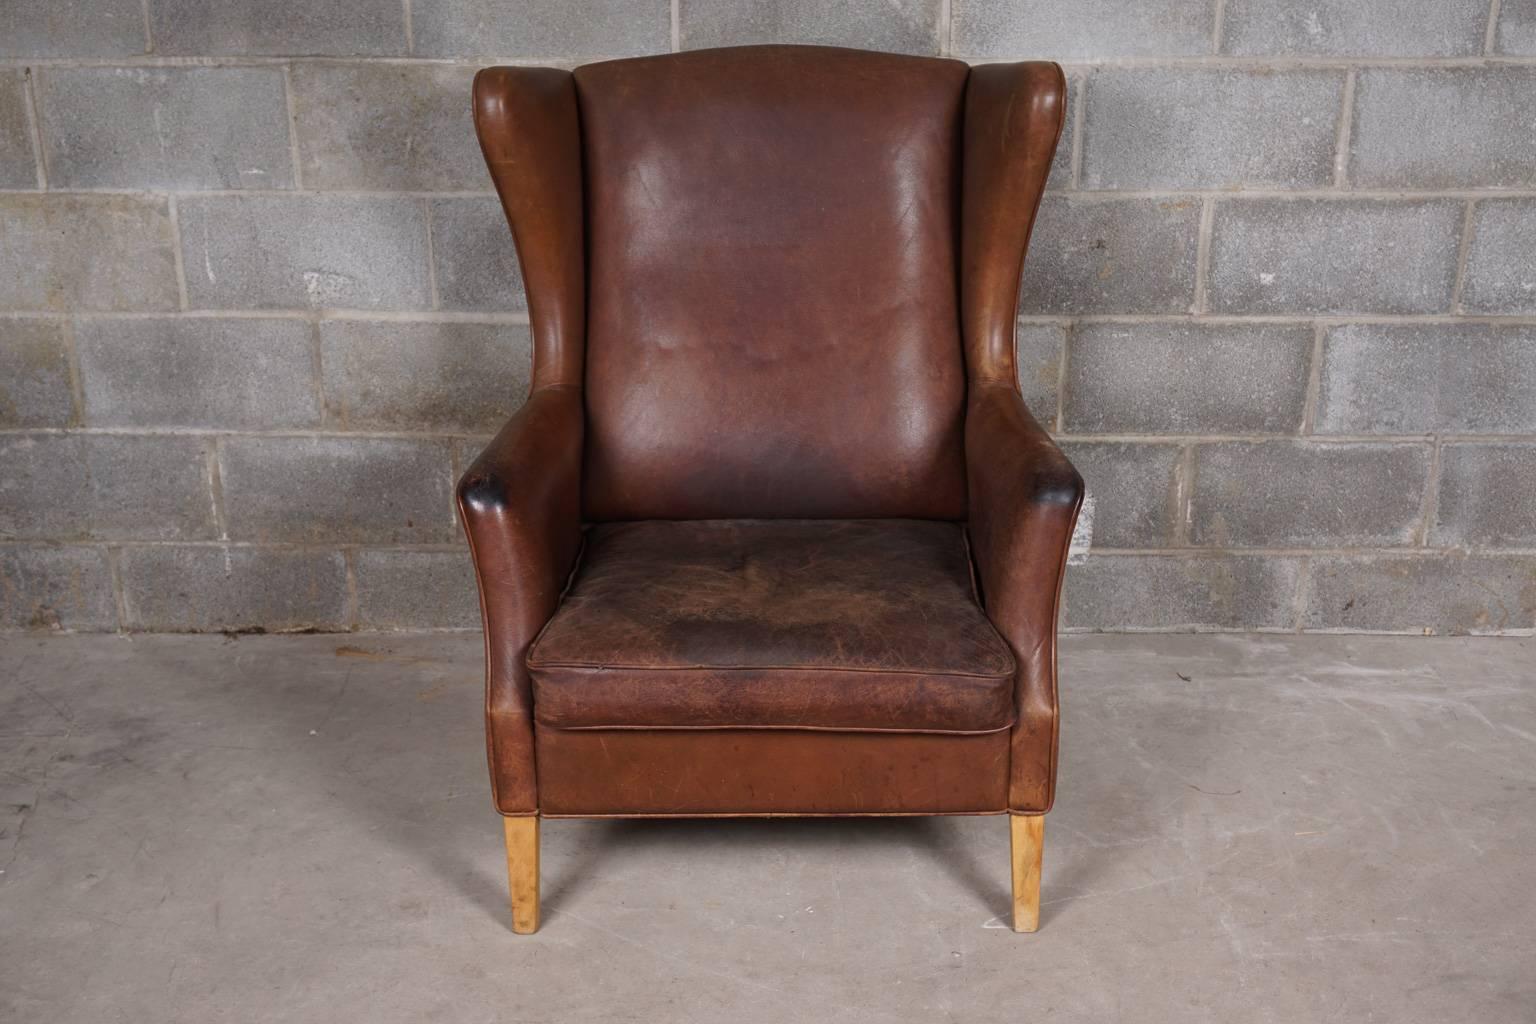 Danish brown leather wingback chair. Great patina and wear.